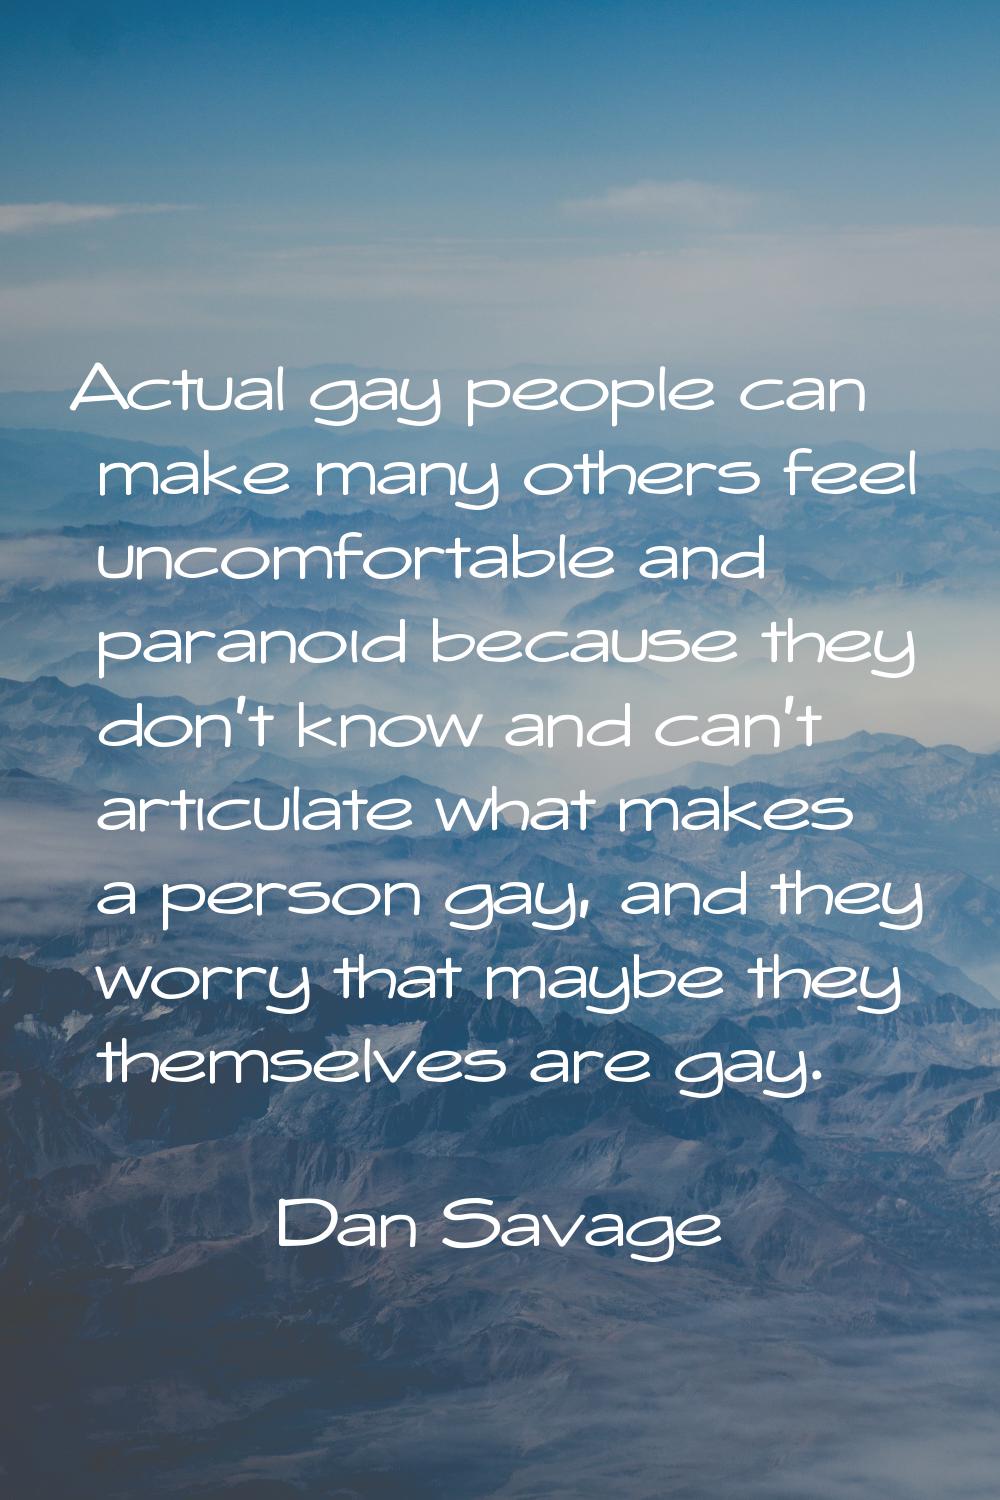 Actual gay people can make many others feel uncomfortable and paranoid because they don't know and 